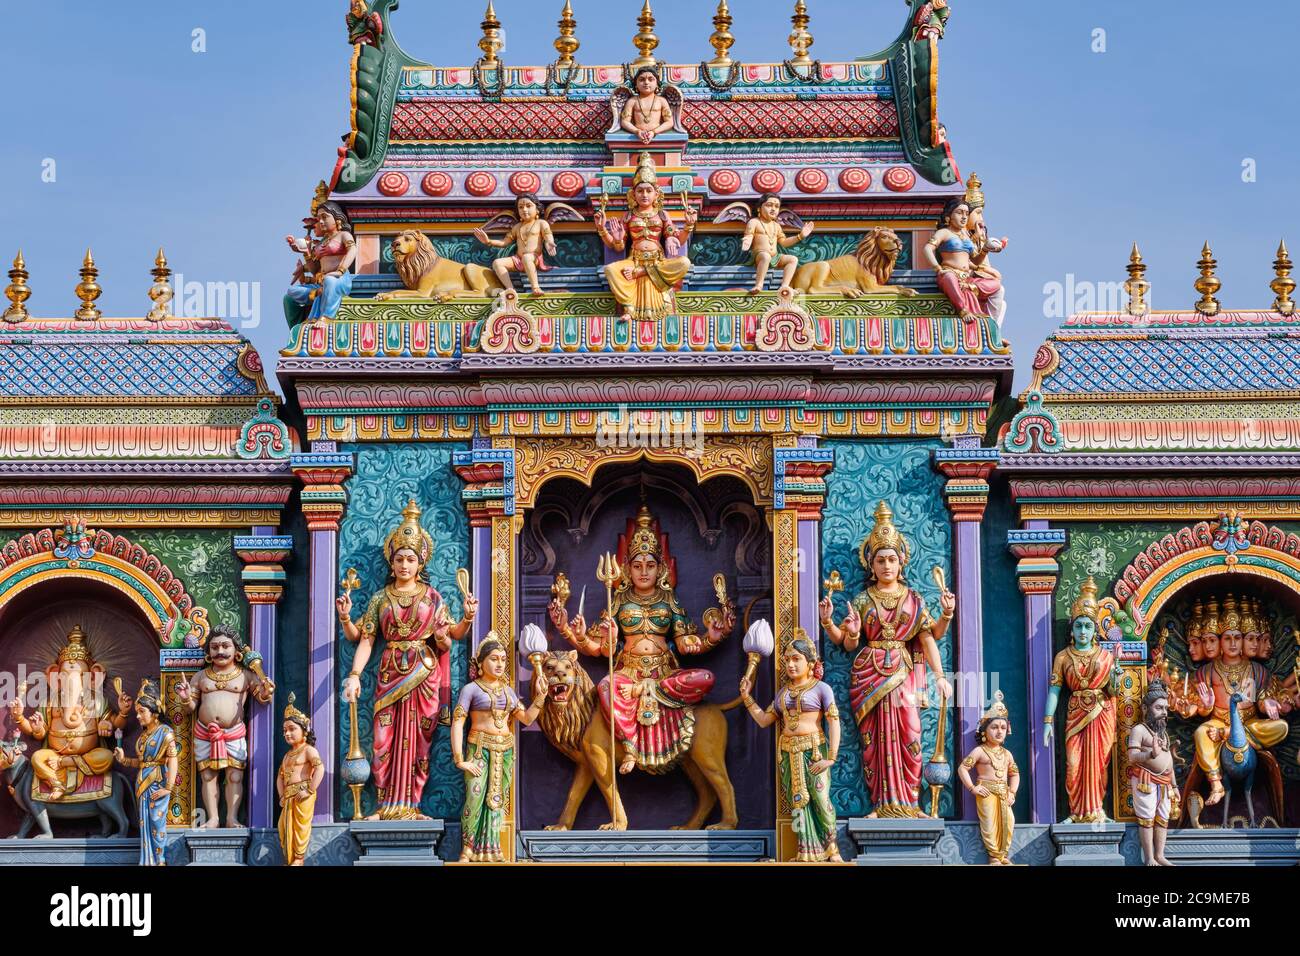 The South Indian-style gopuram (entrance tower) atop Sri Vadapathira Kaliammam Temple, with colorful figures of Hindu deities; Little India, Singapore Stock Photo